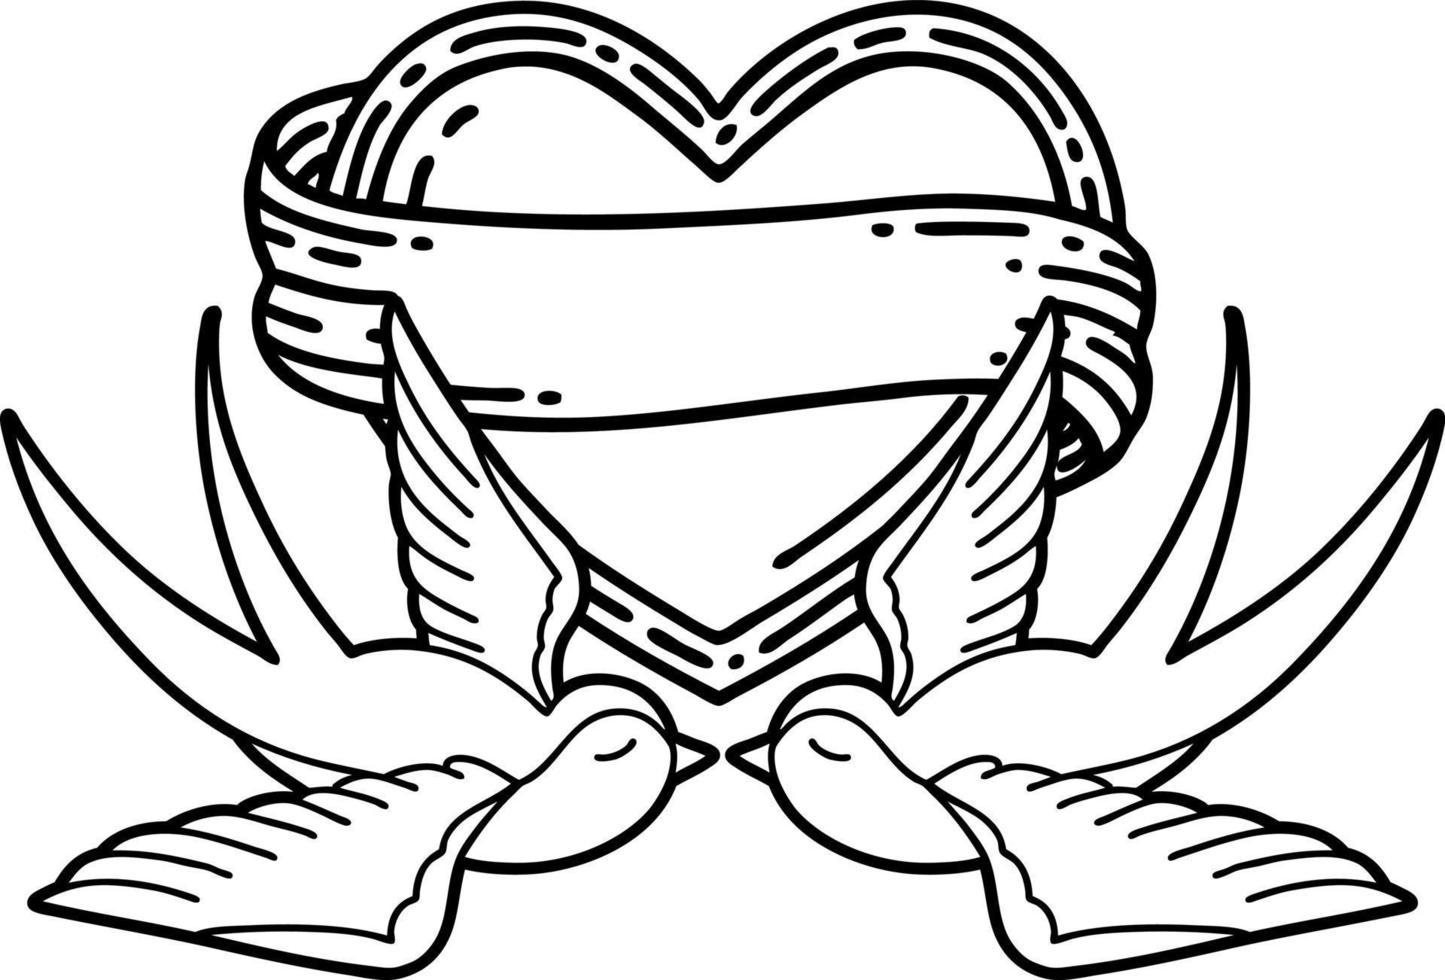 tattoo in black line style of swallows and a heart with banner vector